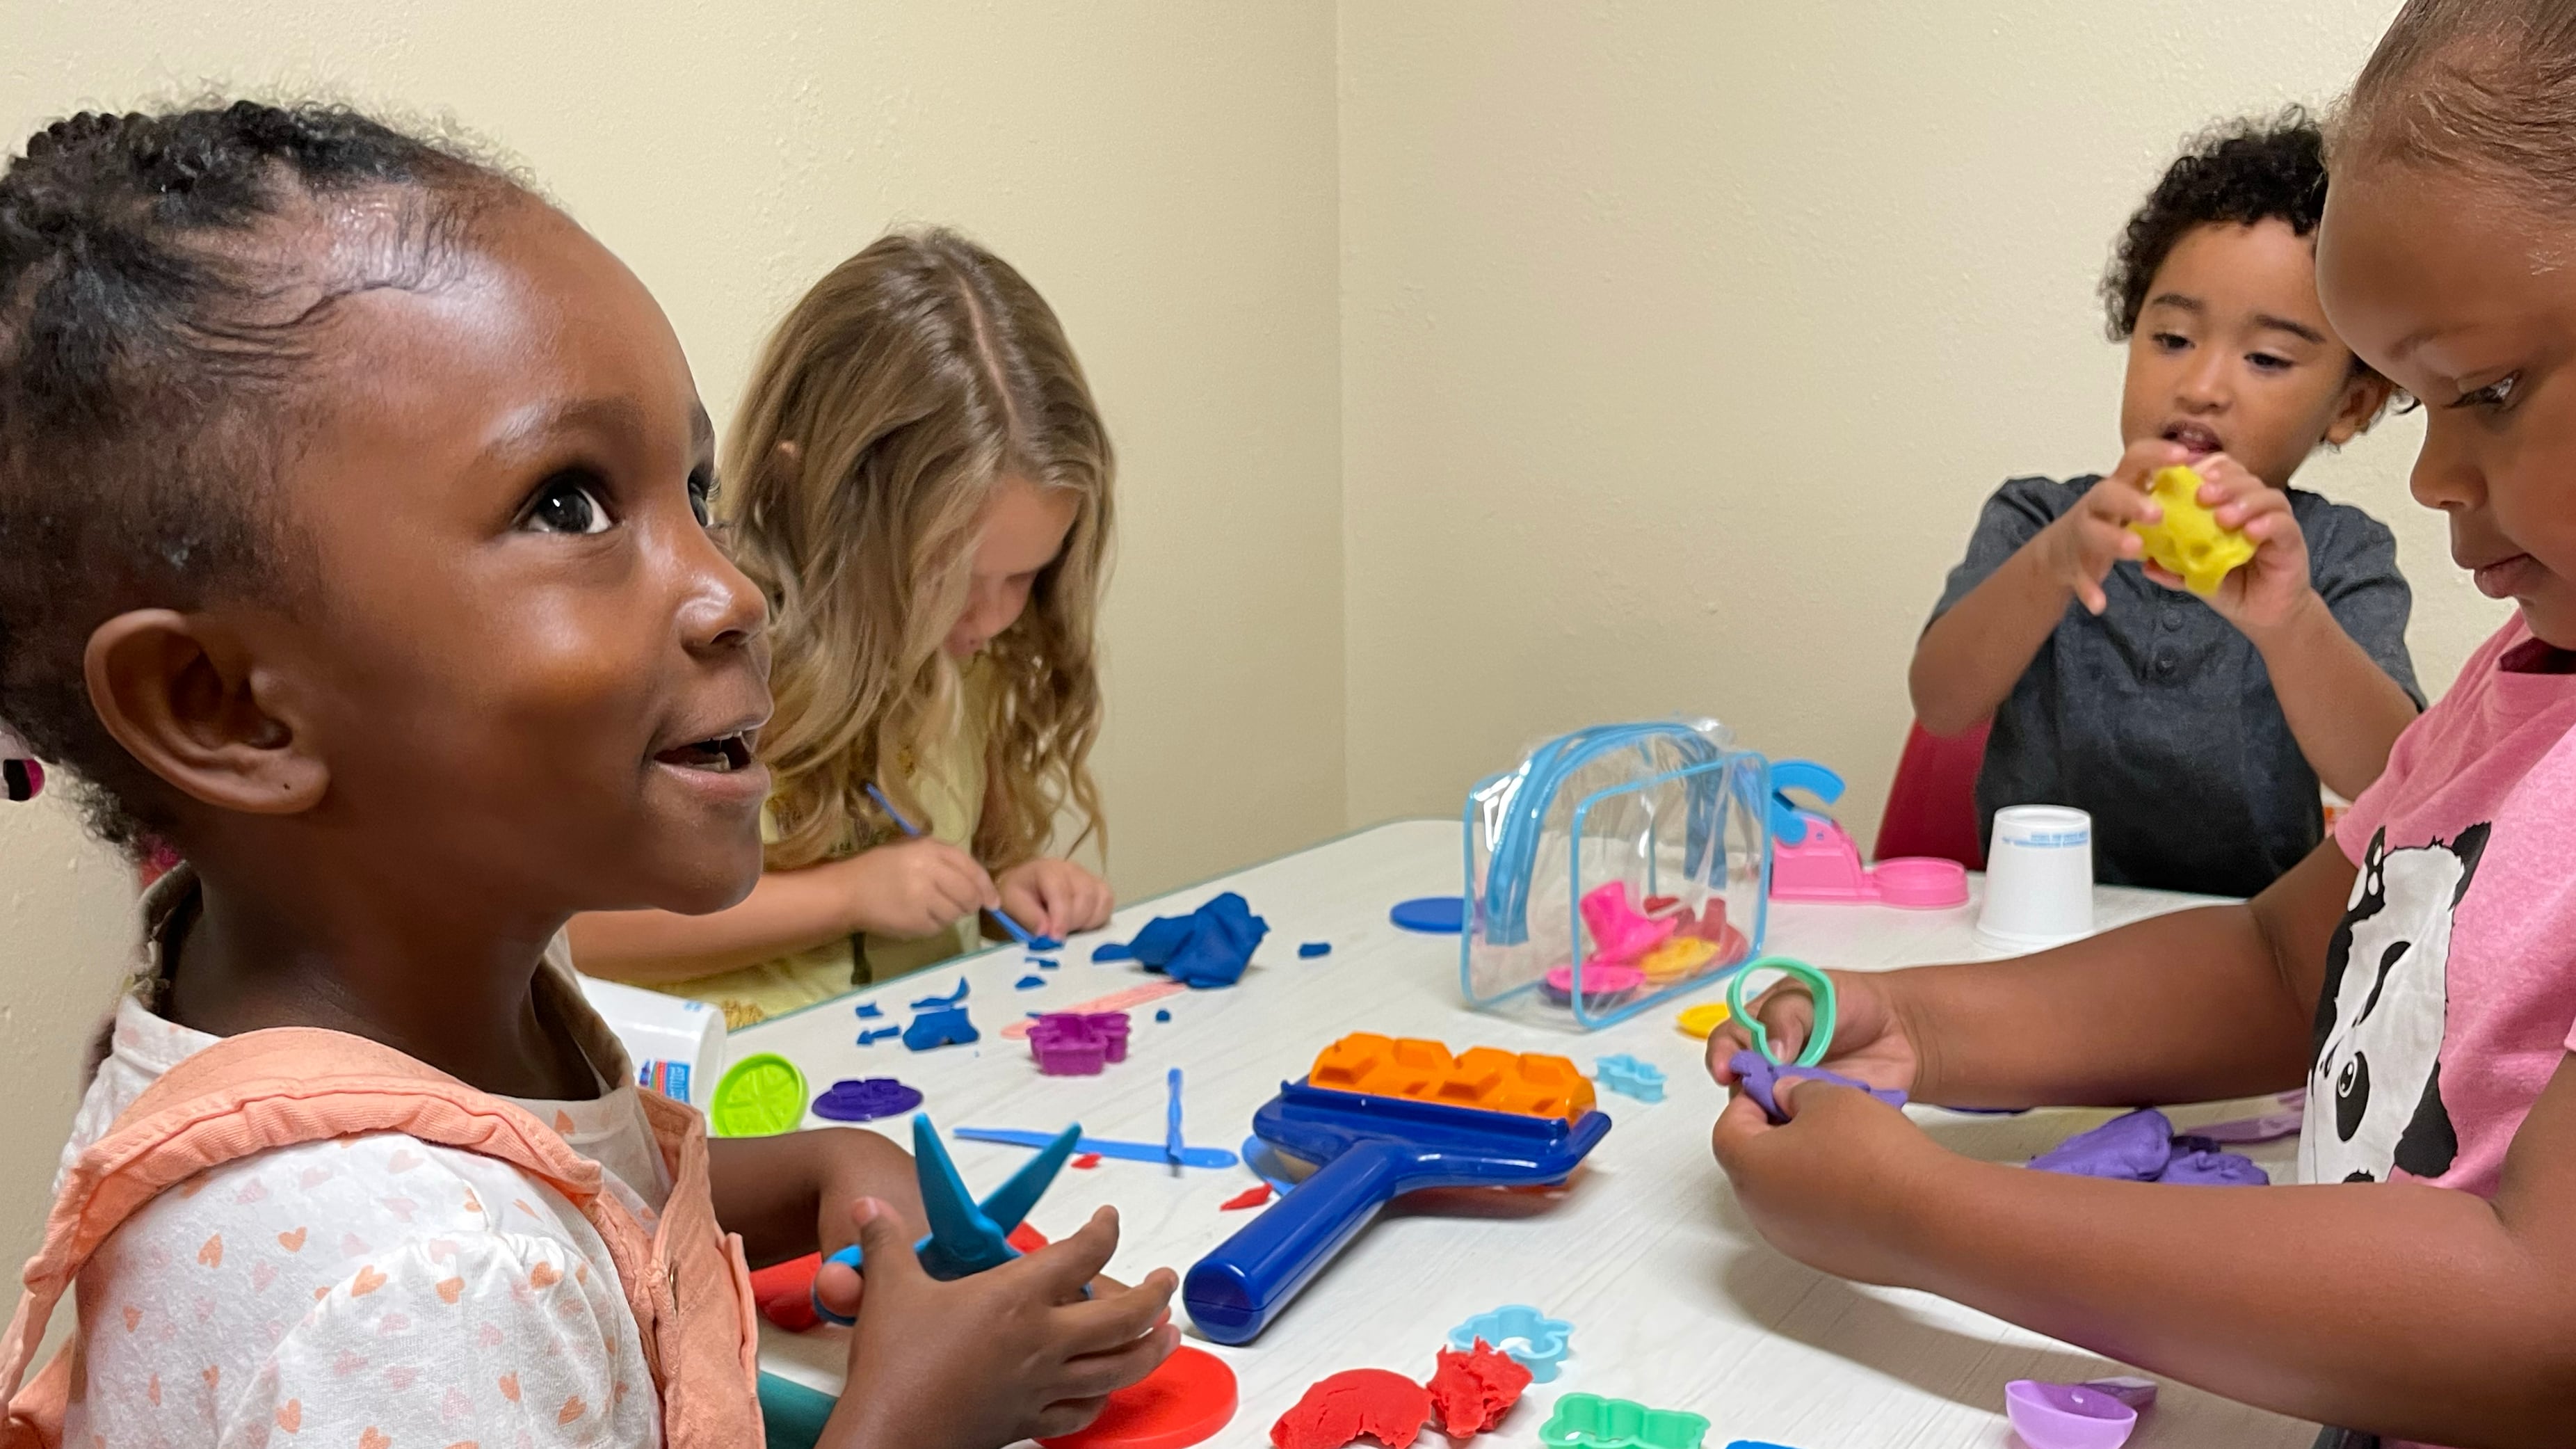 Four young students play with dough and colorful toys at a table.